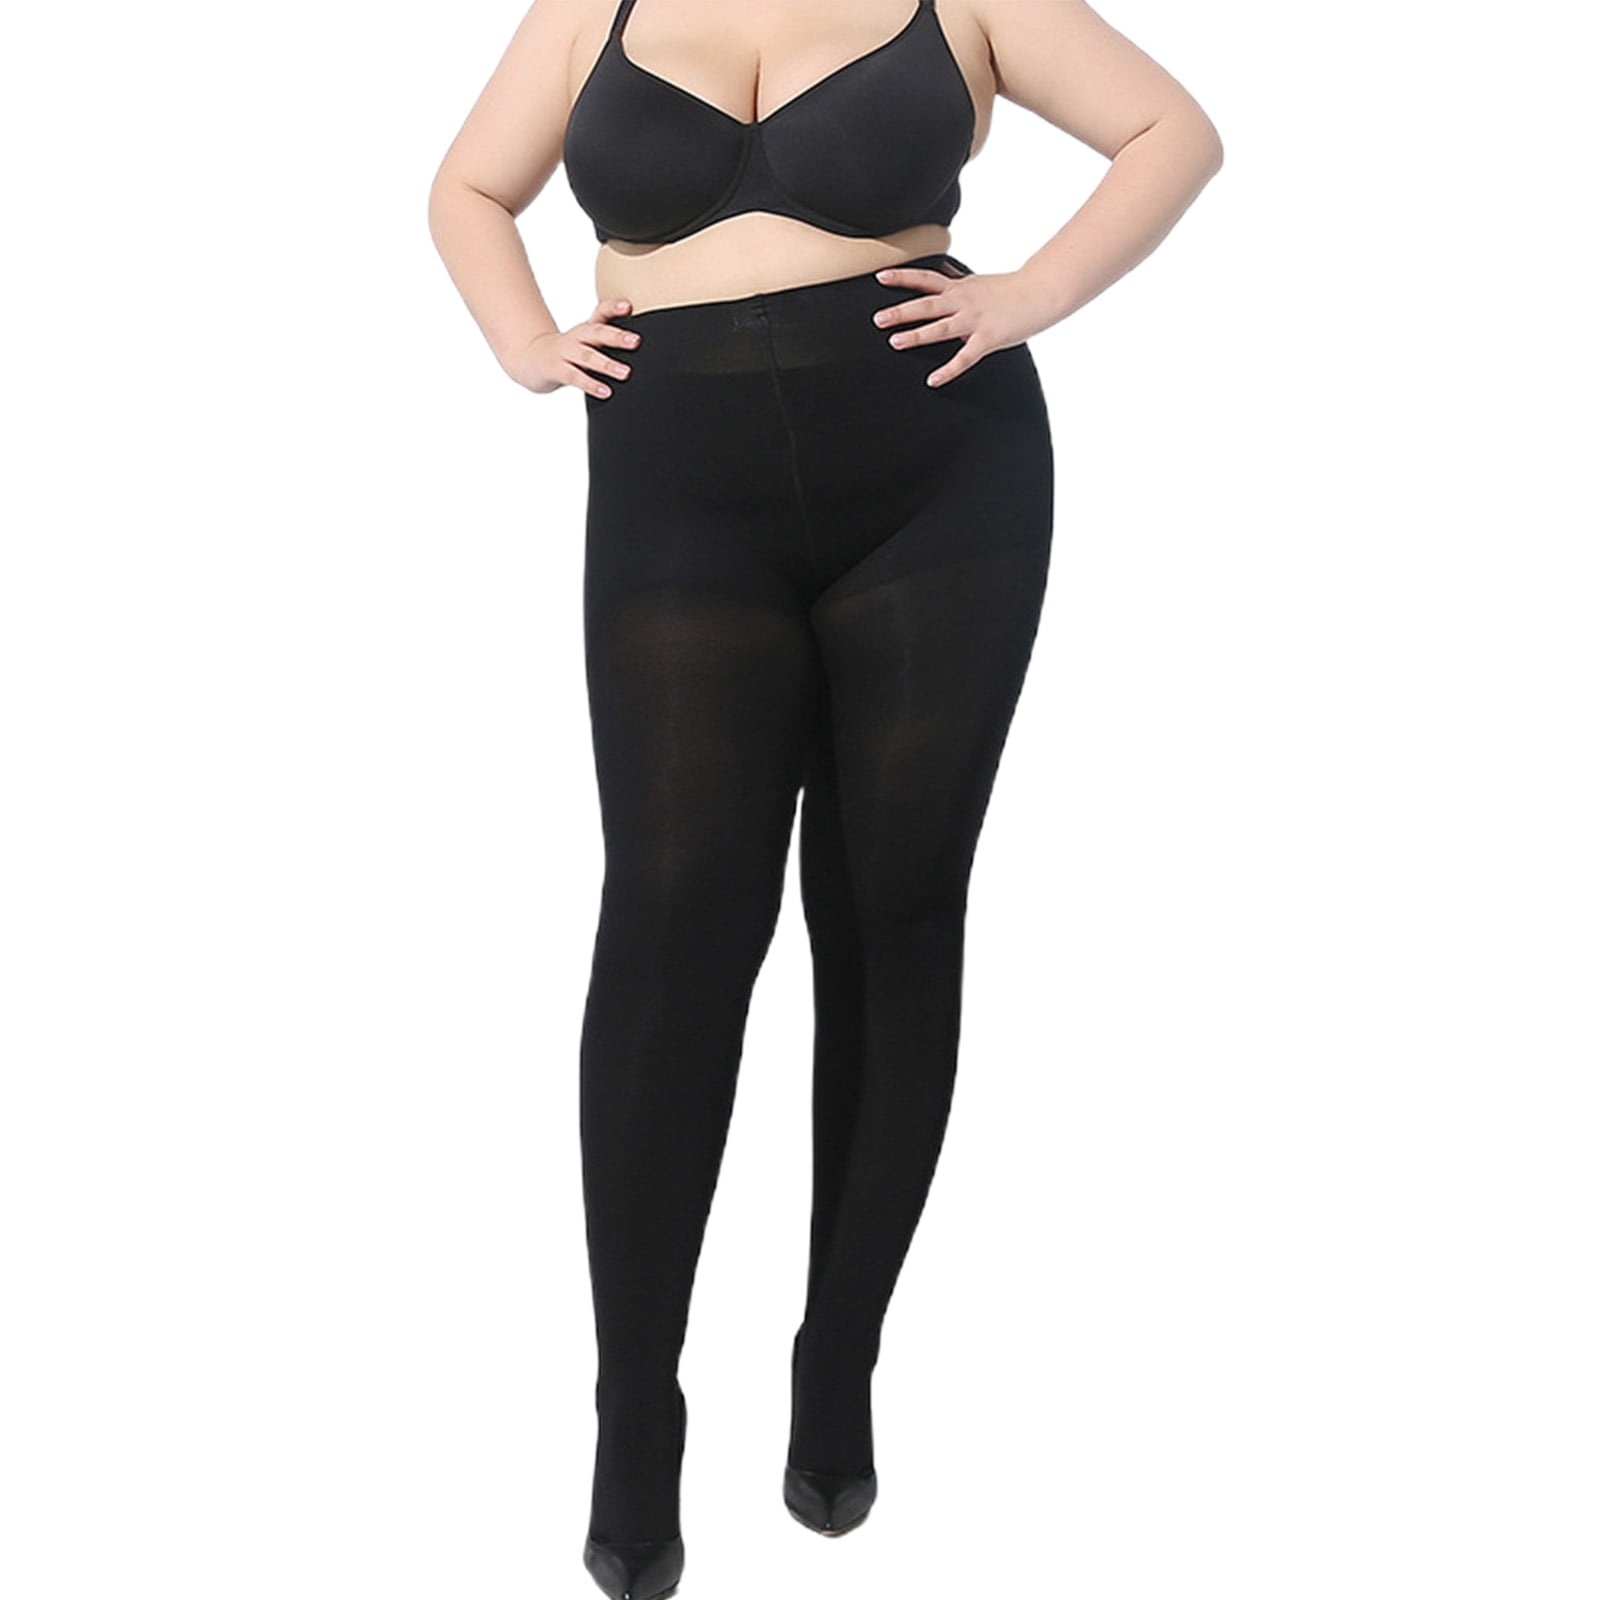 HOTYA Womens Plus Size Opaque Black Tights with Wide Elastic